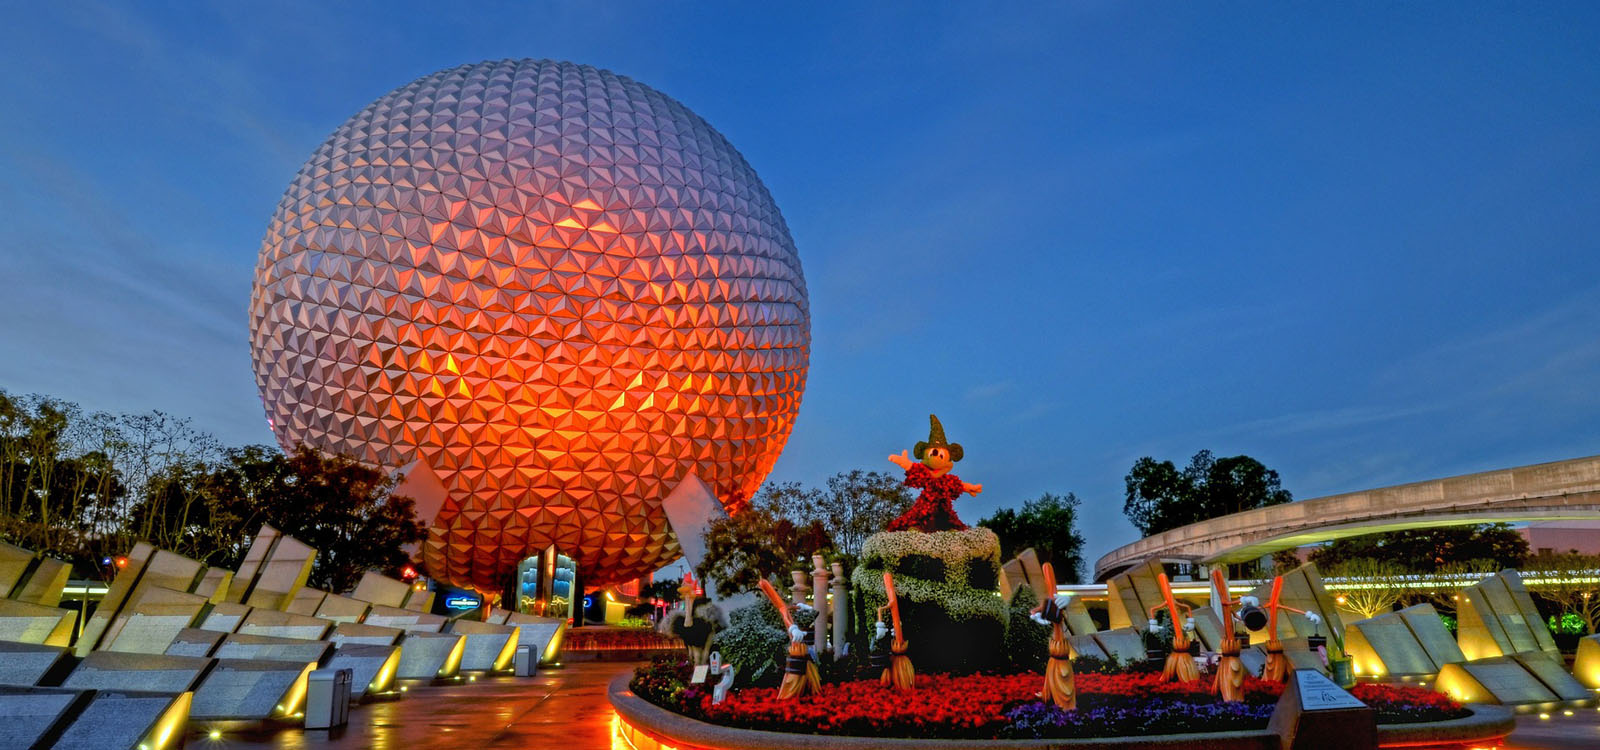 Epcot Hidden Secrets with Spaceship Earth in sunset colors. 